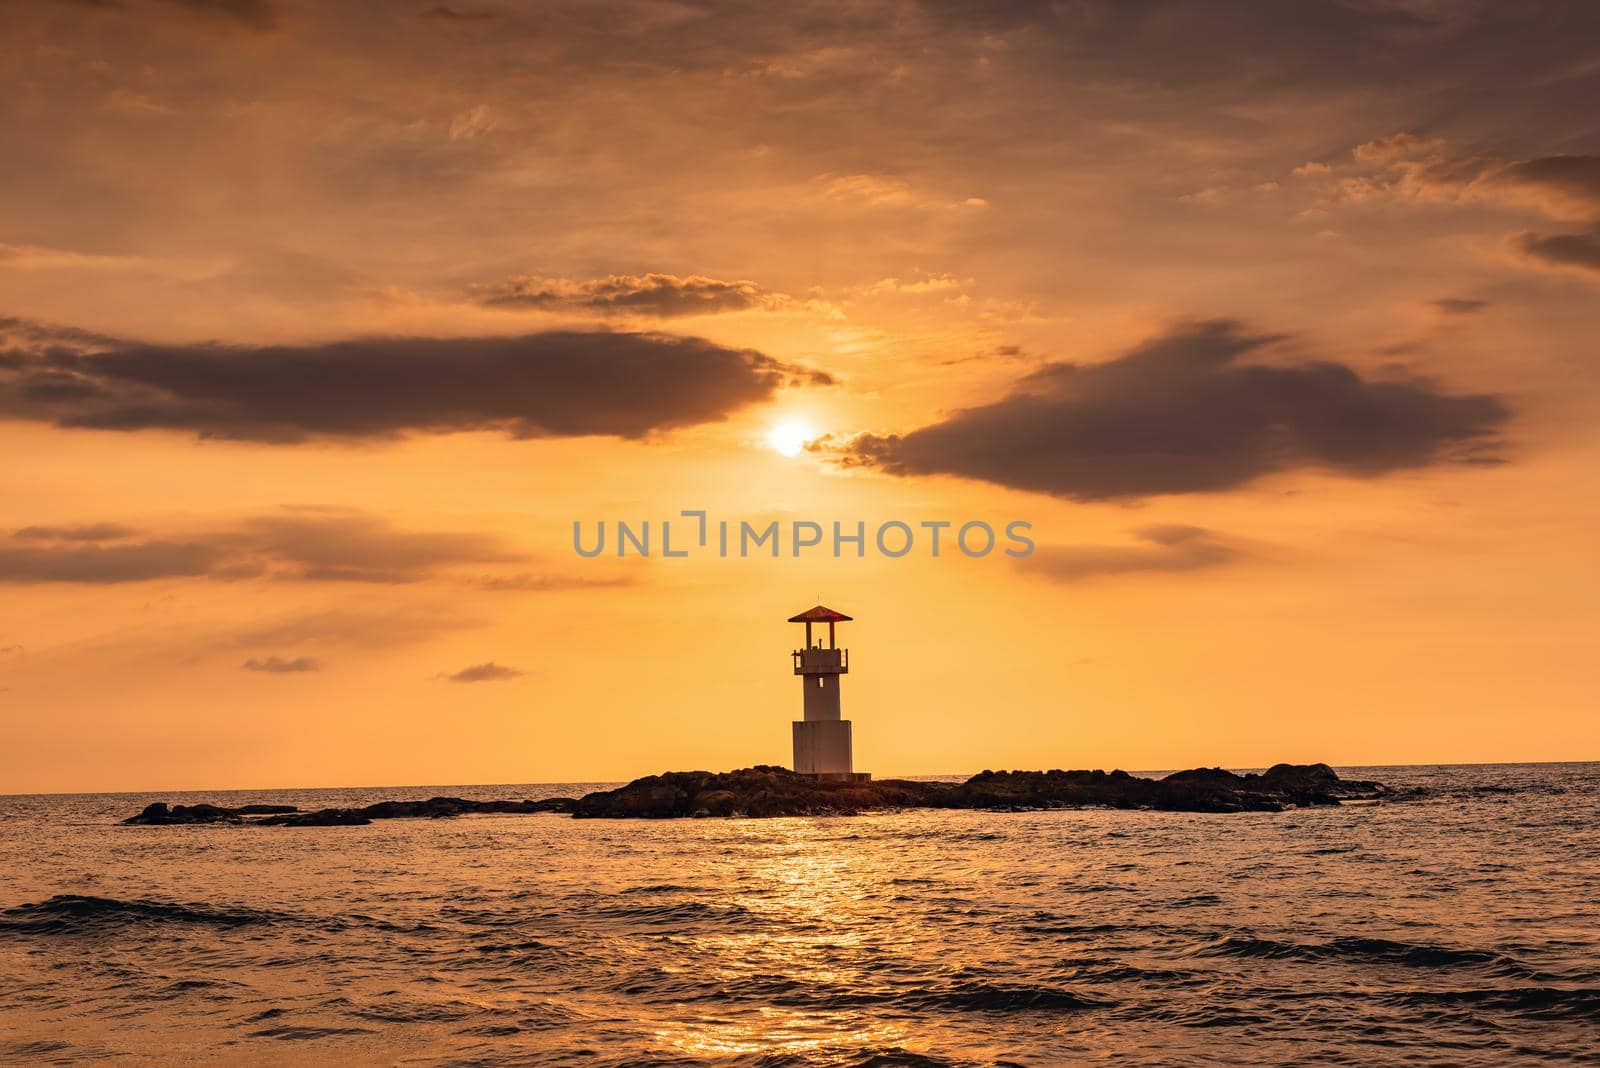 Seascape Scenery View With Lighthouse During Dramatic Cloudy at Sunset, Nature Landscape Tropical Seashore Scenic and Beautiful Beach Against Horizon Over The Sea Water. Natural Panoramic of The Beach by MahaHeang245789